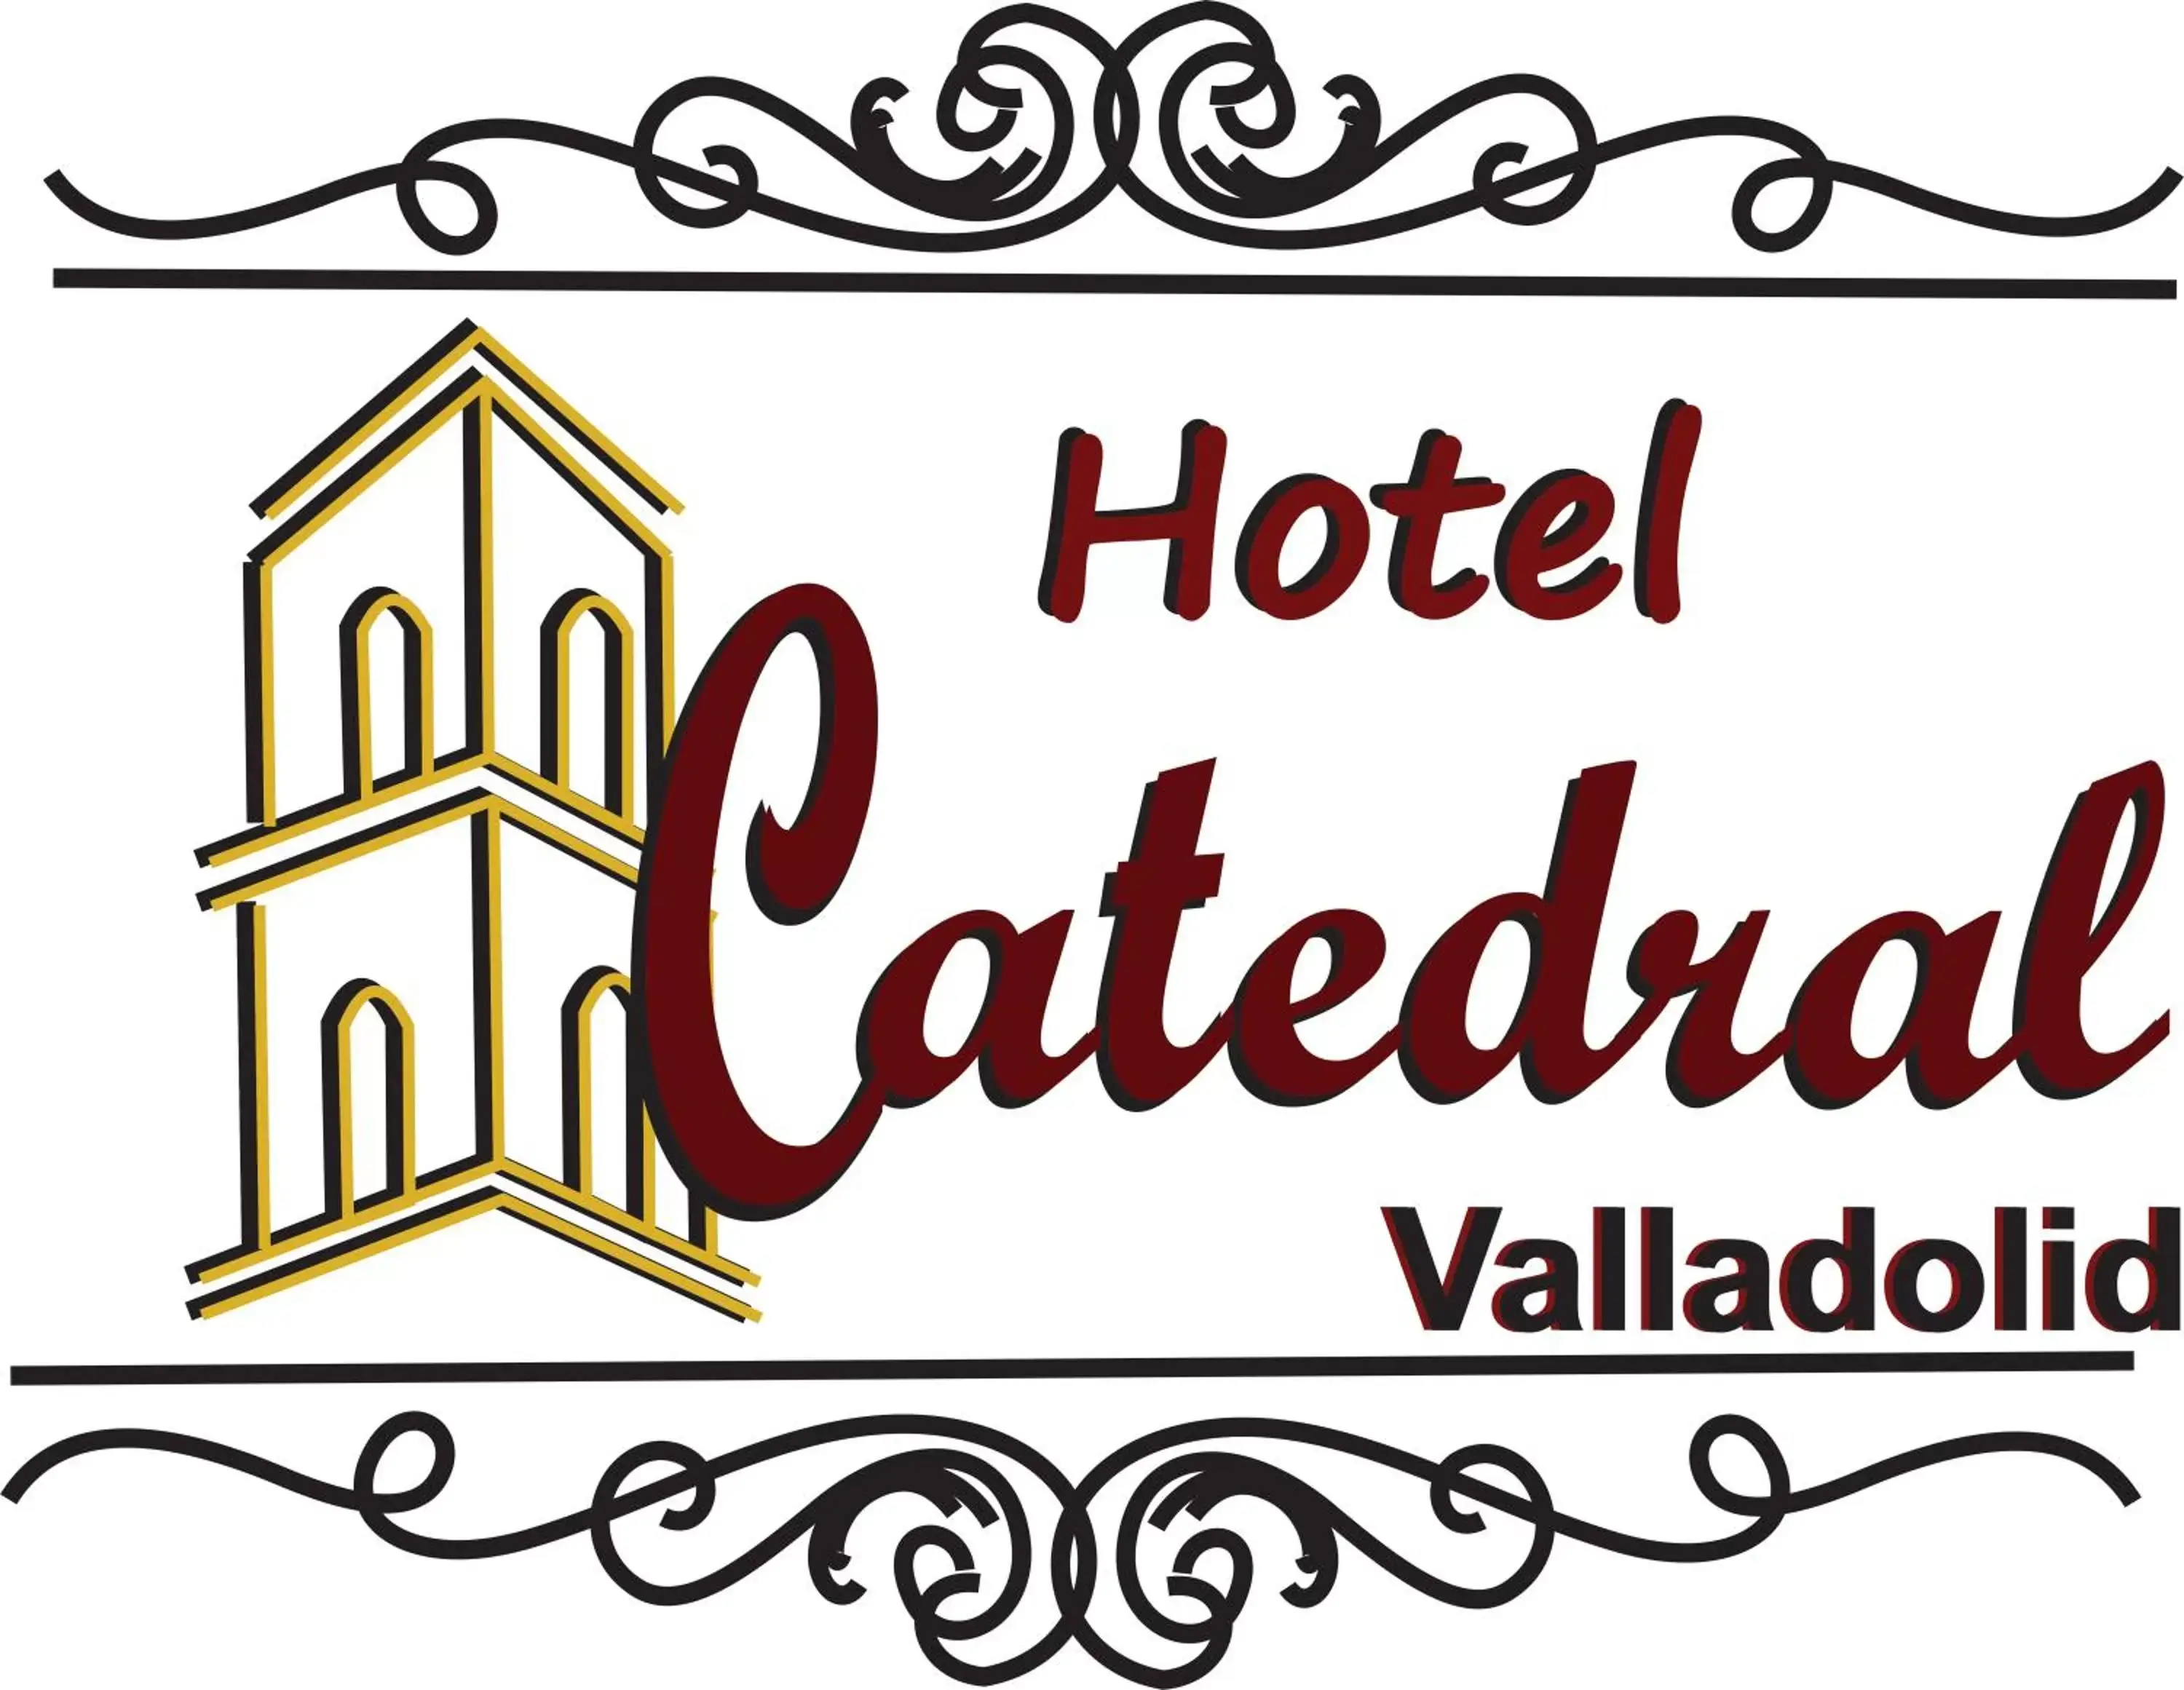 Logo/Certificate/Sign in Hotel Catedral Valladolid Yucatan